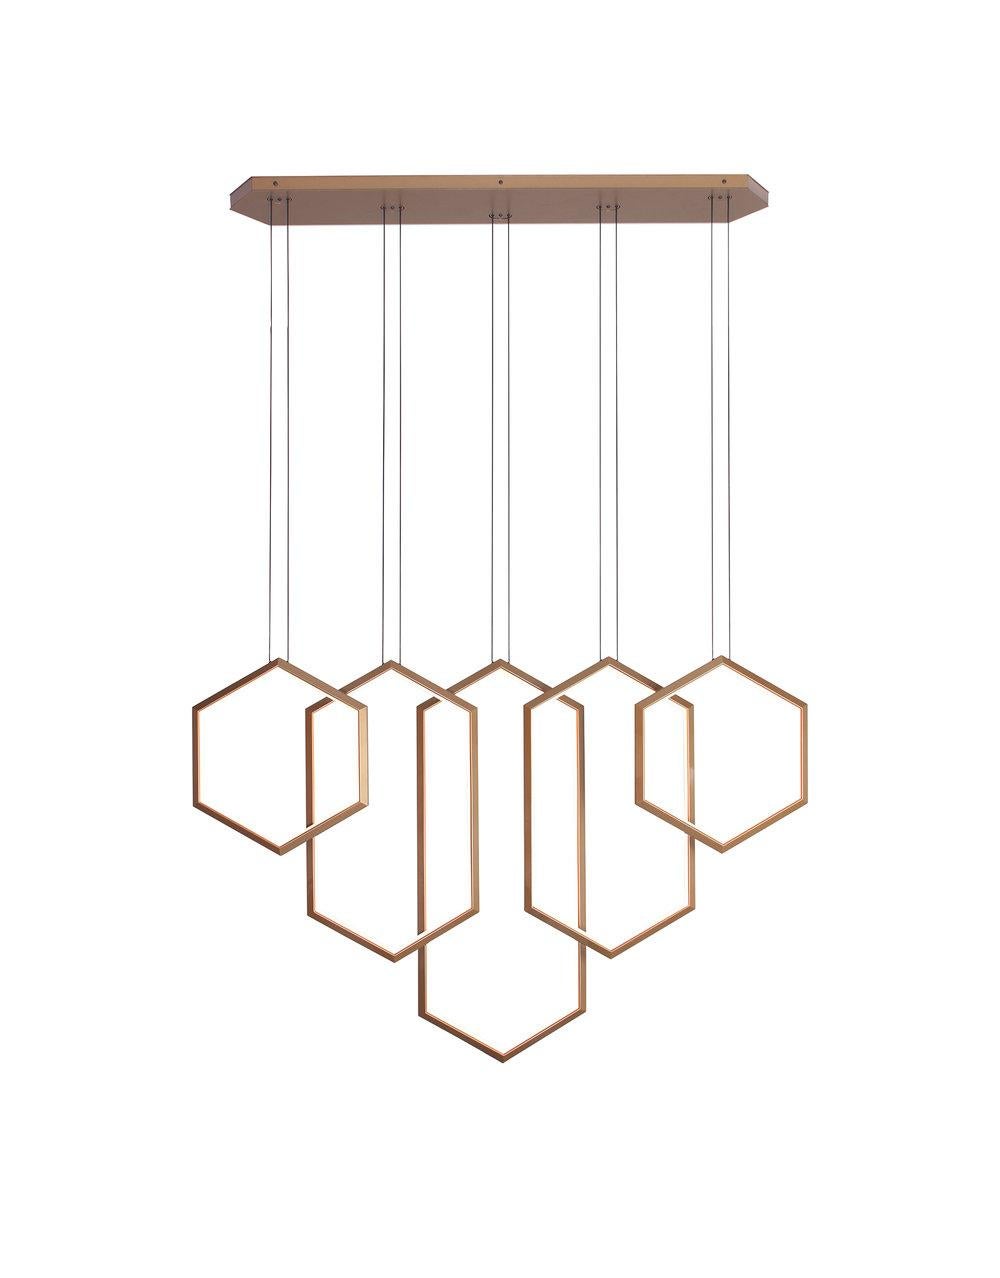 Figaro V is a sculptural chandelier that transforms any space with its grand presence. Five hexagonal rings overlap to create a dynamic silhouette. FIGARO V illuminates elegantly in a lobby, atrium or reception area. The height of each ring can be